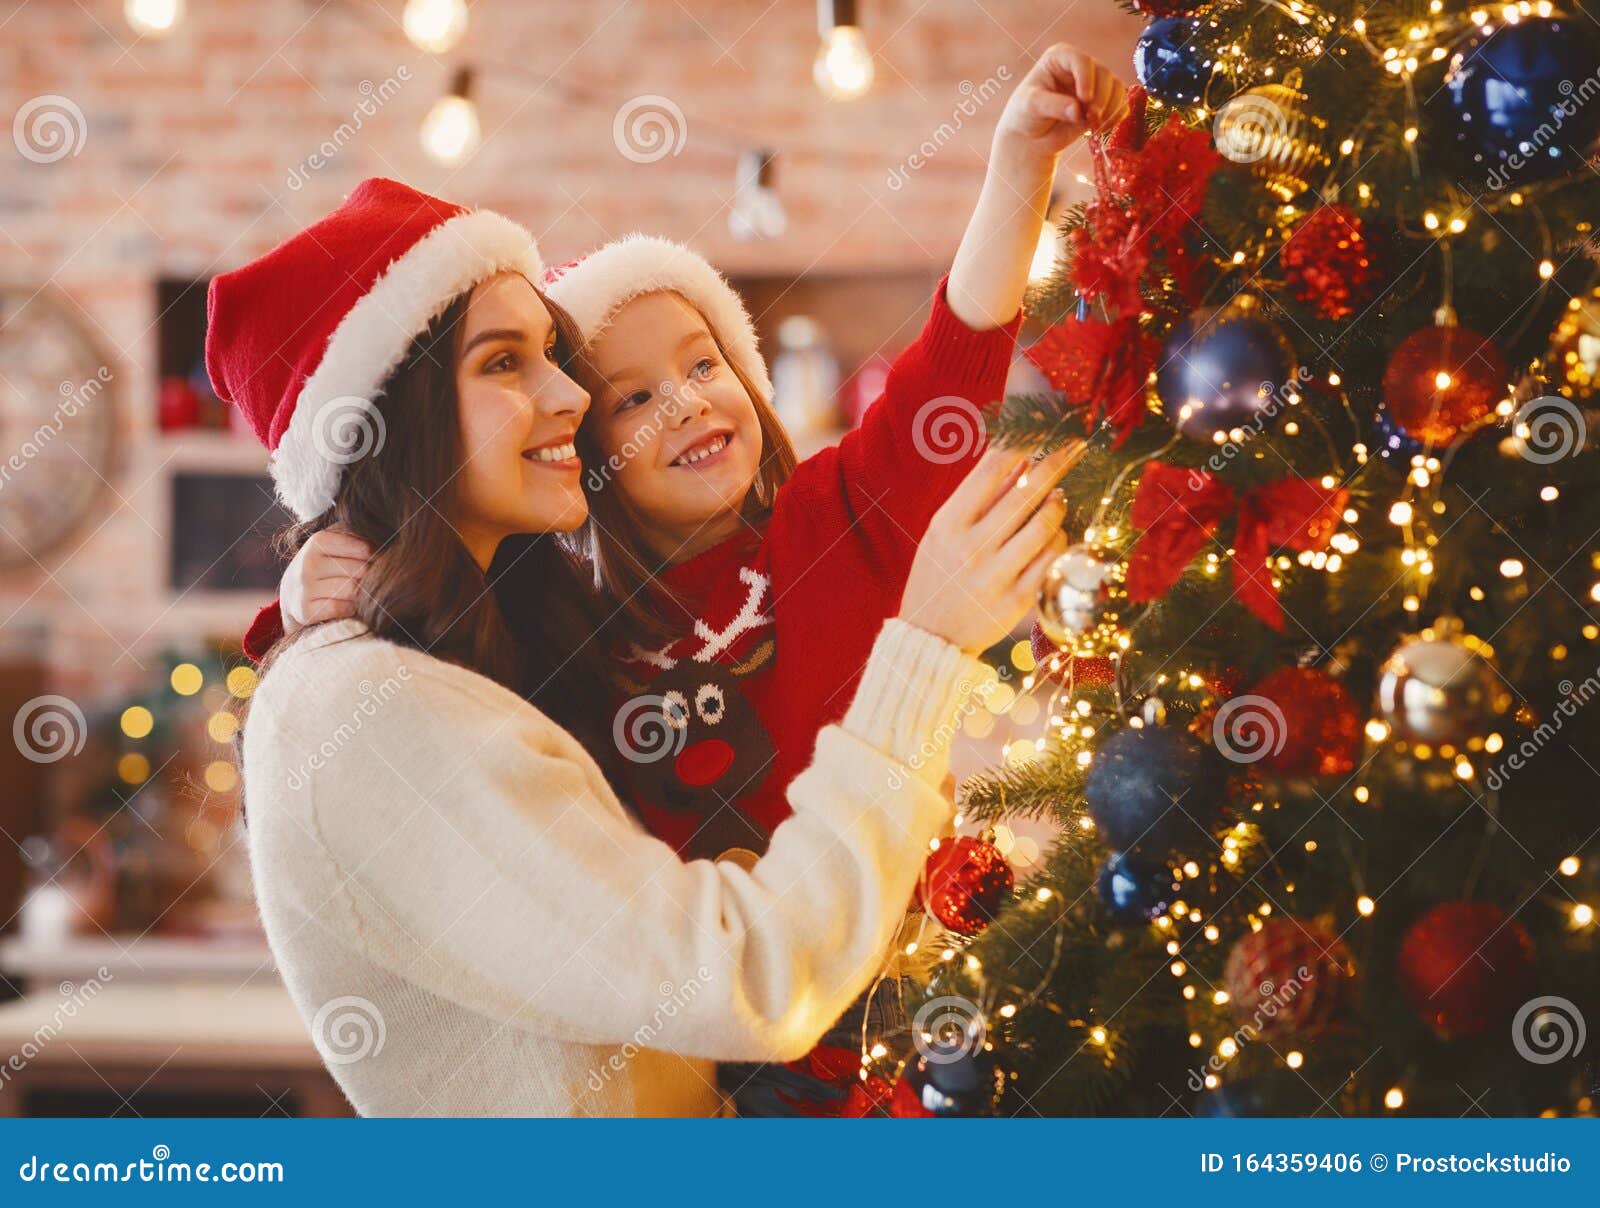 festive mother and daughter decorating christmas tree at home